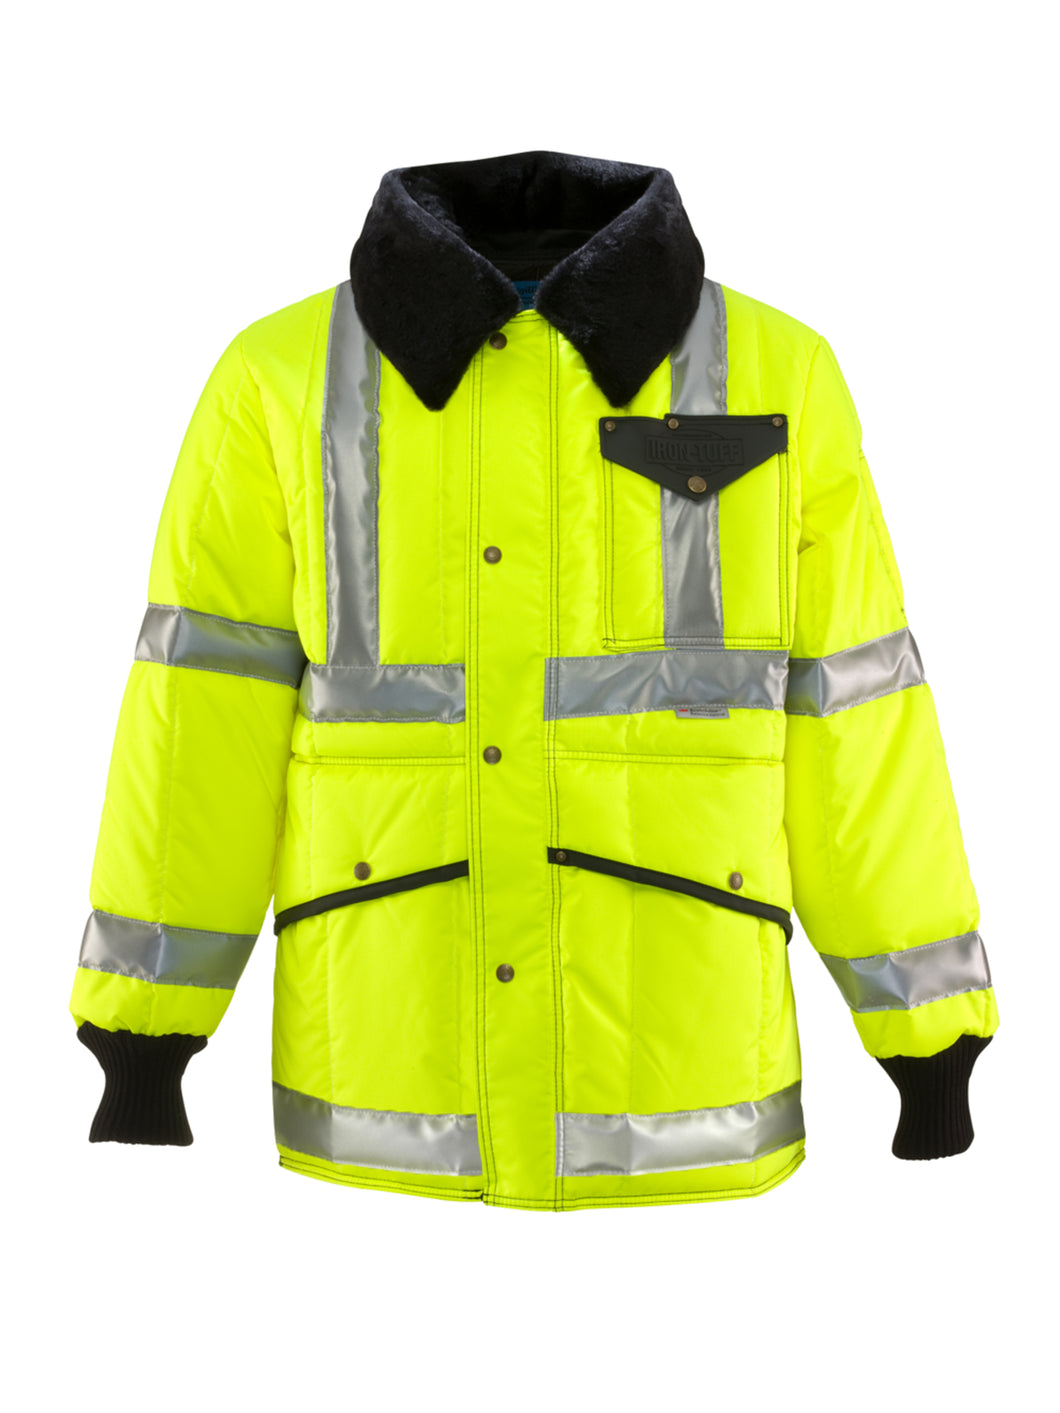 Refrigiwear 0342L2 Iron-Tuff High Visibility Jackoat with Reflective Tape